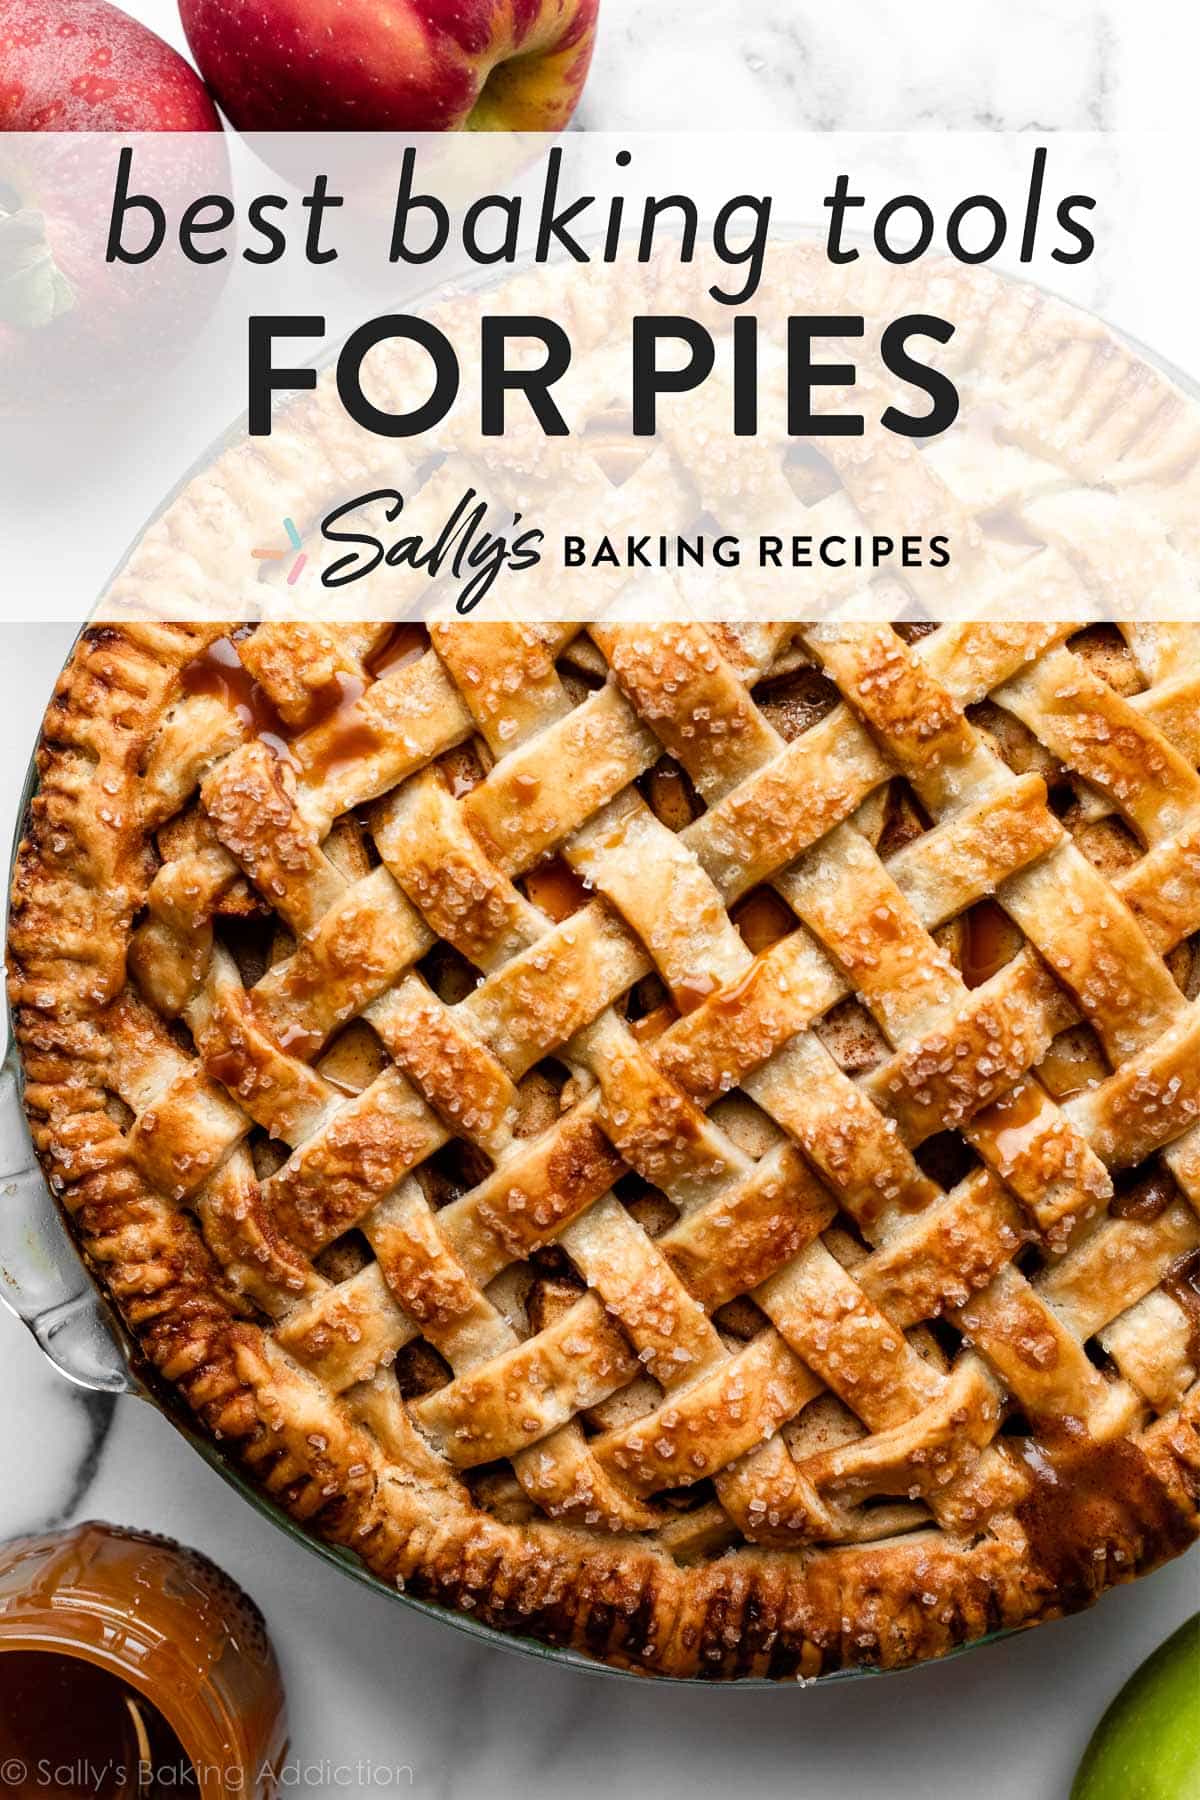 apple pie with lattice top crust with text overlay that says best baking tools for pies.